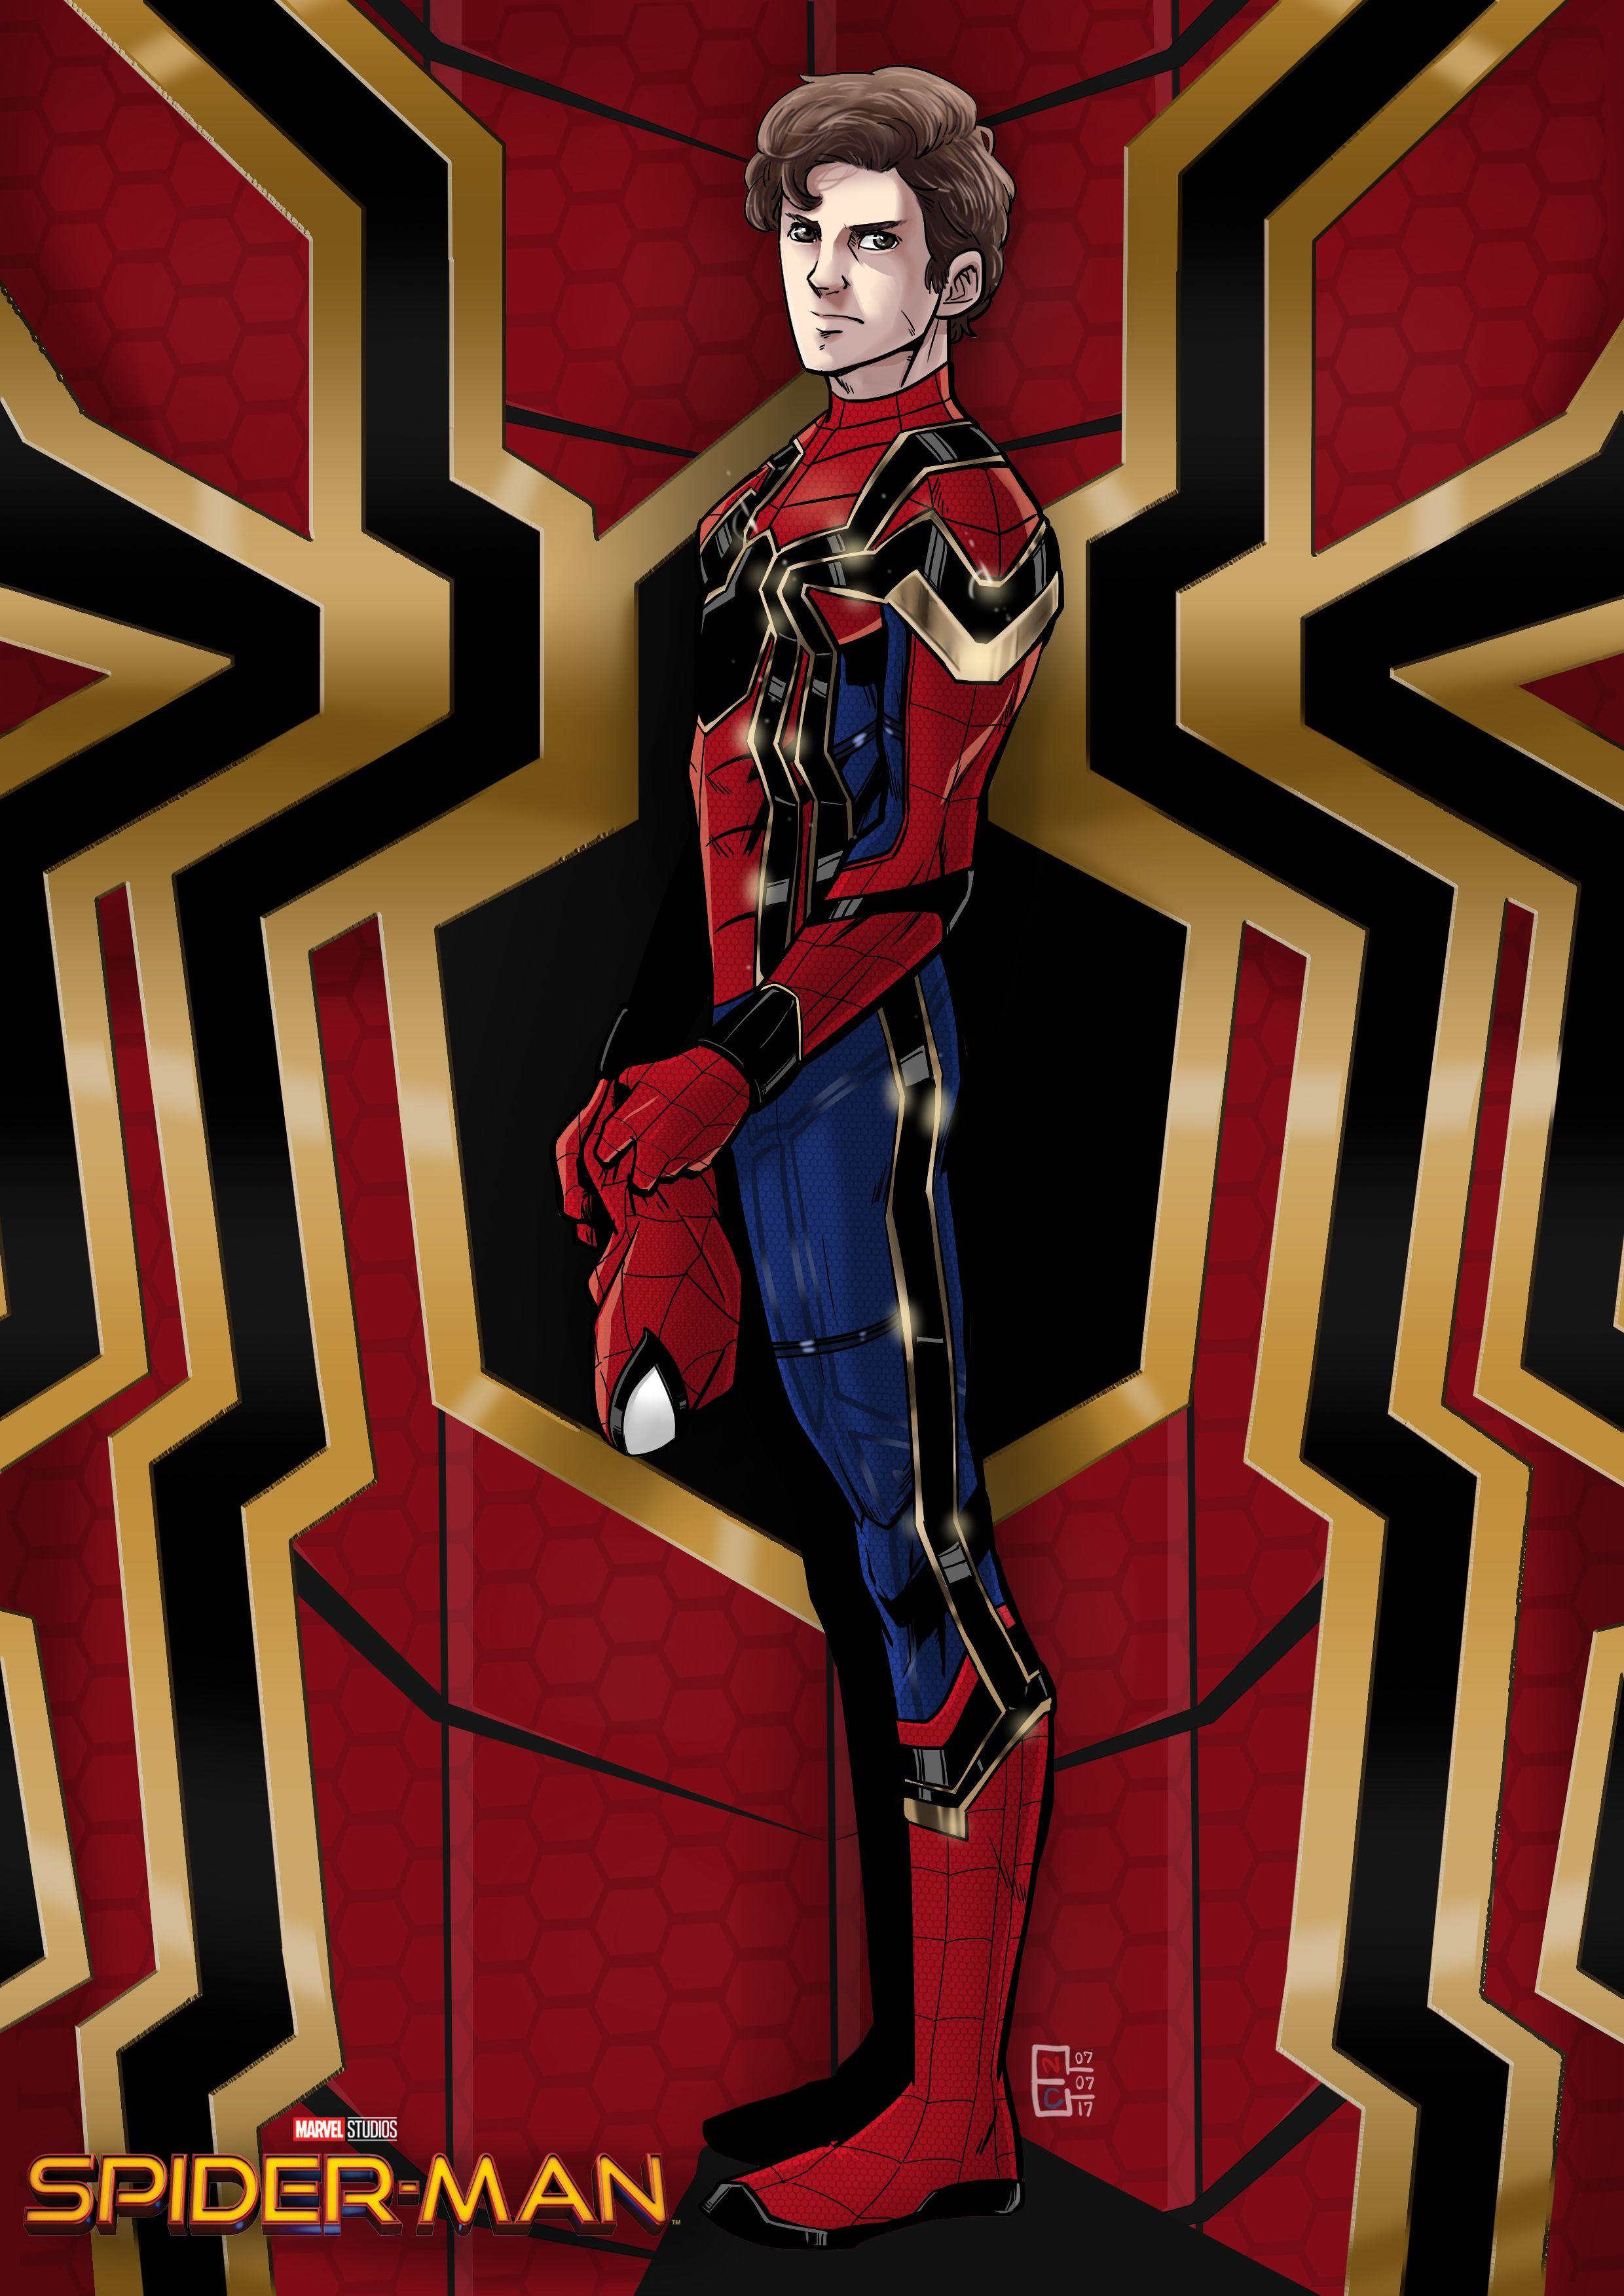 Iron Spider Suit, Homecoming Ver.In my imagination